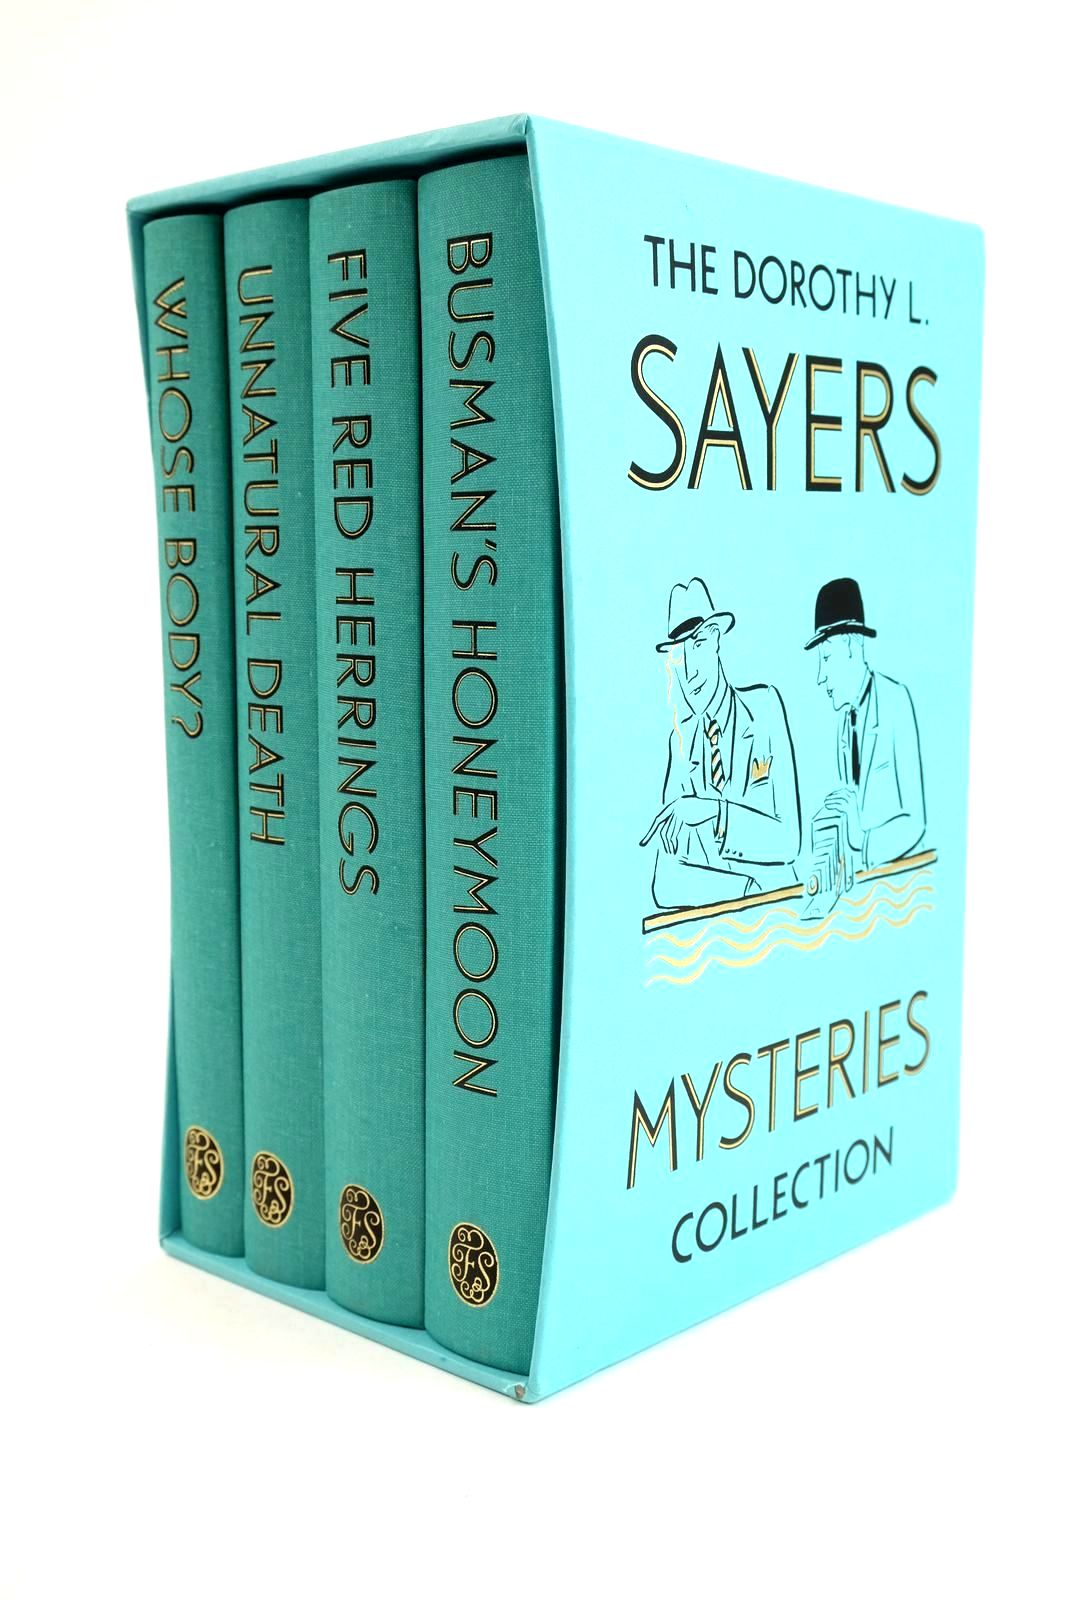 Photo of THE DOROTHY L. SAYERS MYSTERIES COLLECTION (4 VOLUMES) written by Sayers, Dorothy L. illustrated by Ledwidge, Natacha published by Folio Society (STOCK CODE: 1323754)  for sale by Stella & Rose's Books